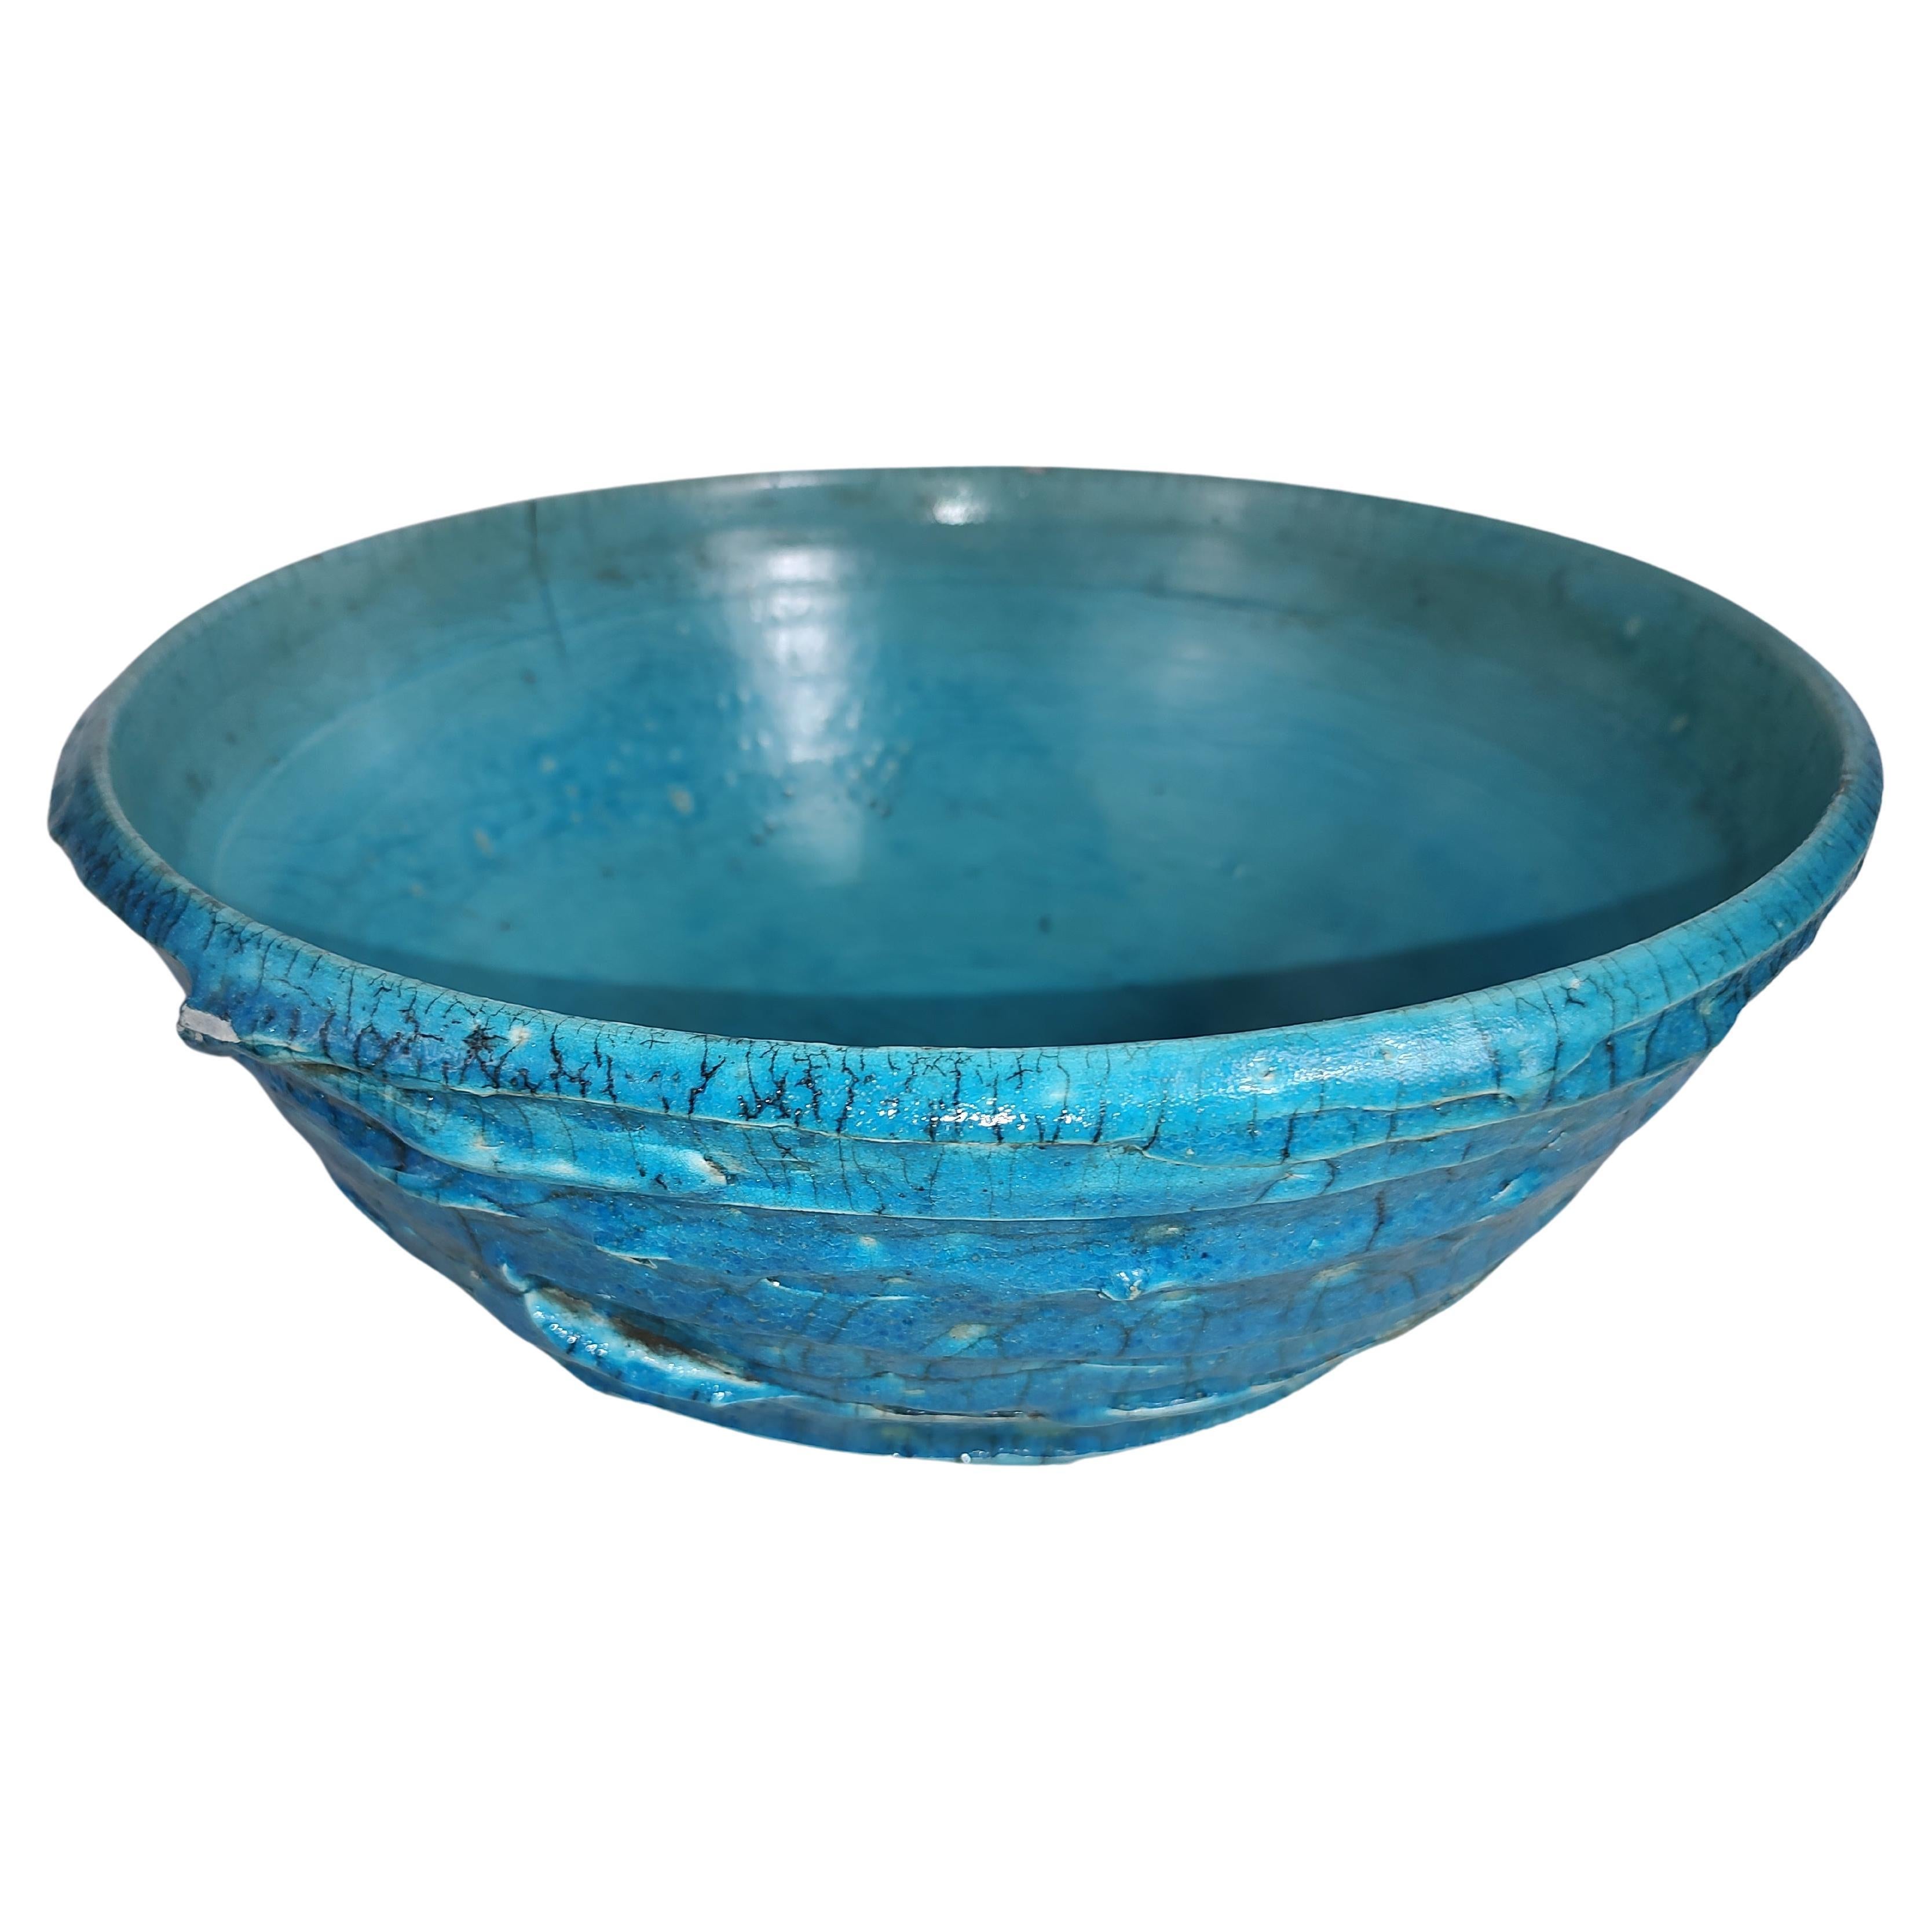 Fantastic colors of blue with a fabulous texture. This large bowl is a beauty and can function for more than just decoration's. In excellent vintage condition with minimal wear. Crackle is part of the design, still rings true when sounded. Can be